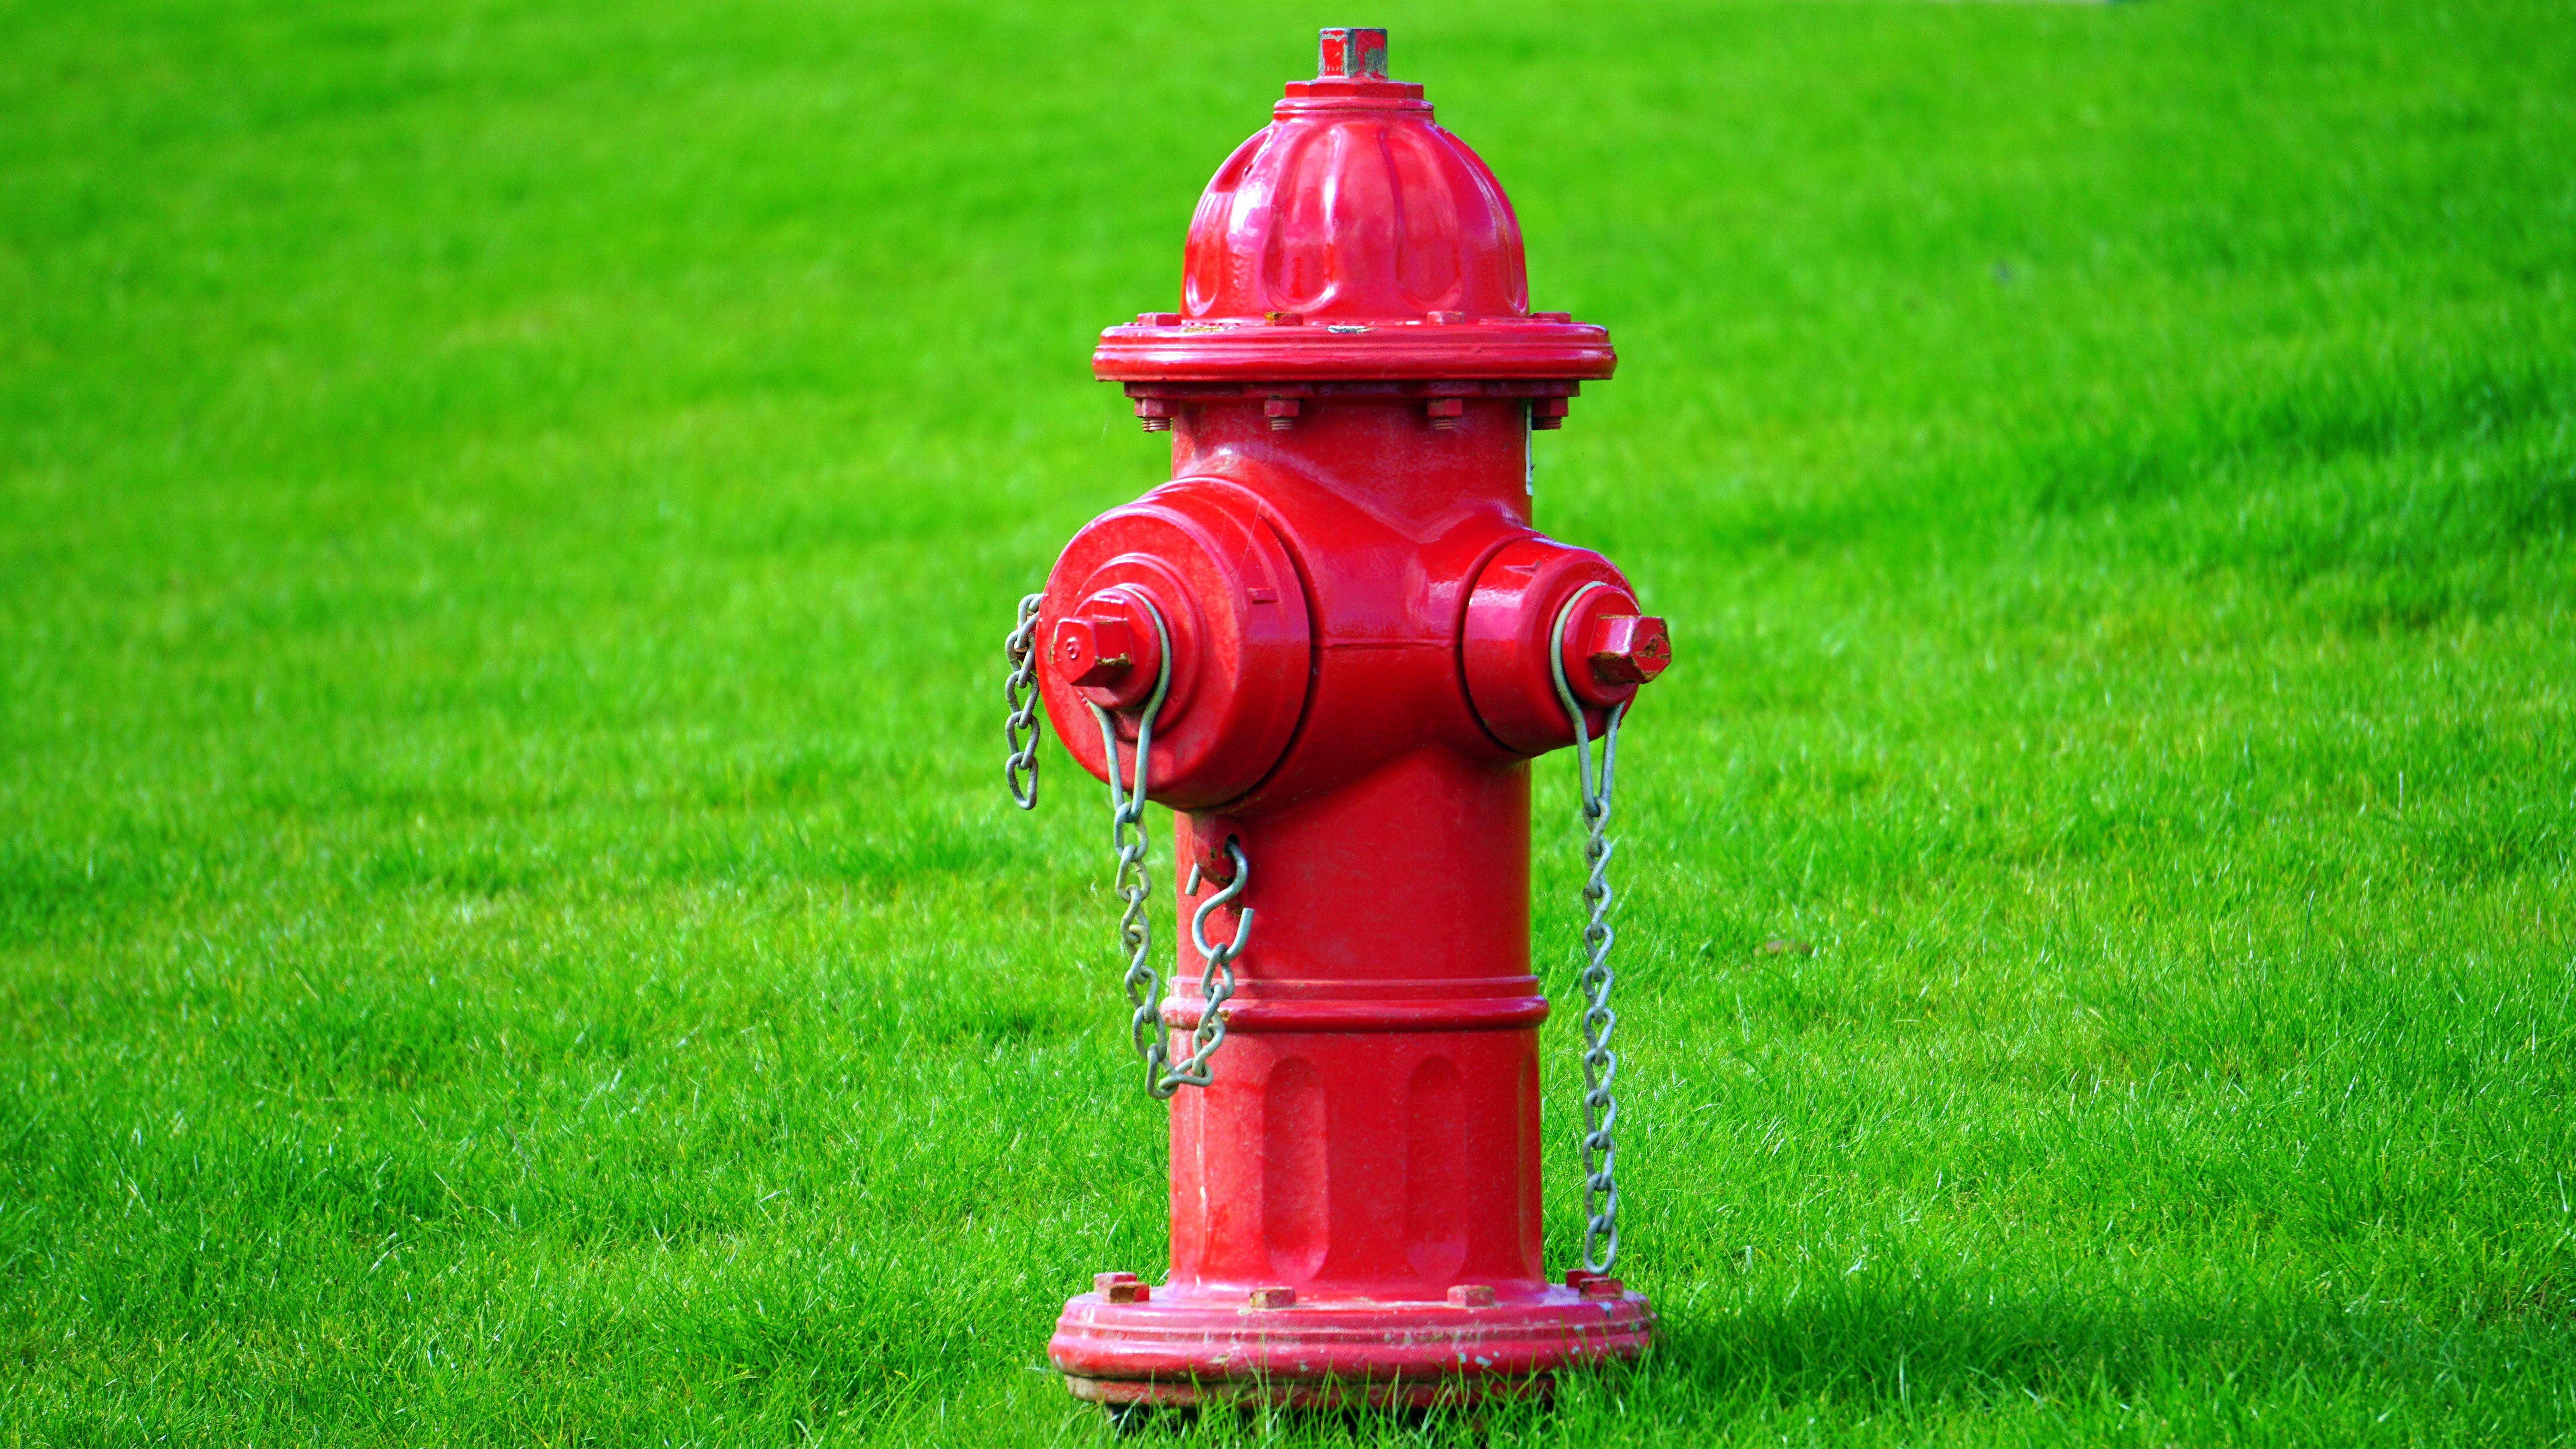 Red fire hydrant on green grass field photo